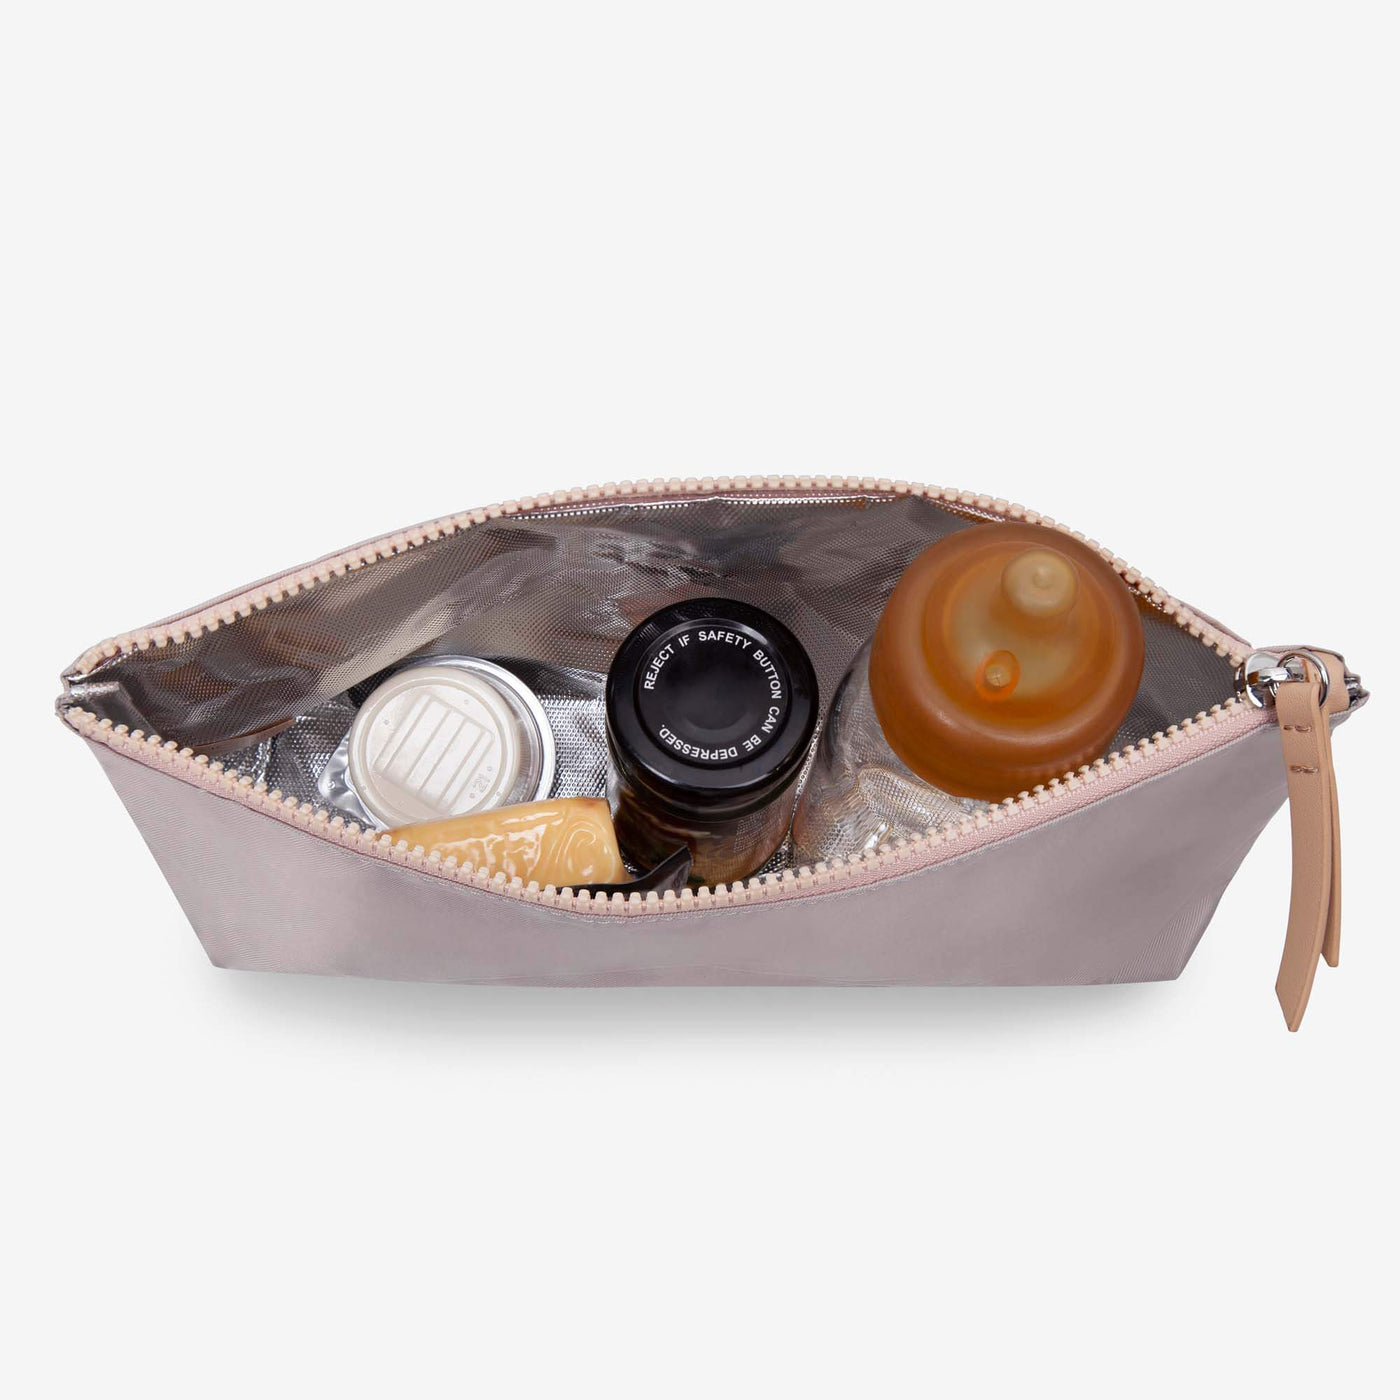 NEW! Insulated Waterproof Packing Pouch